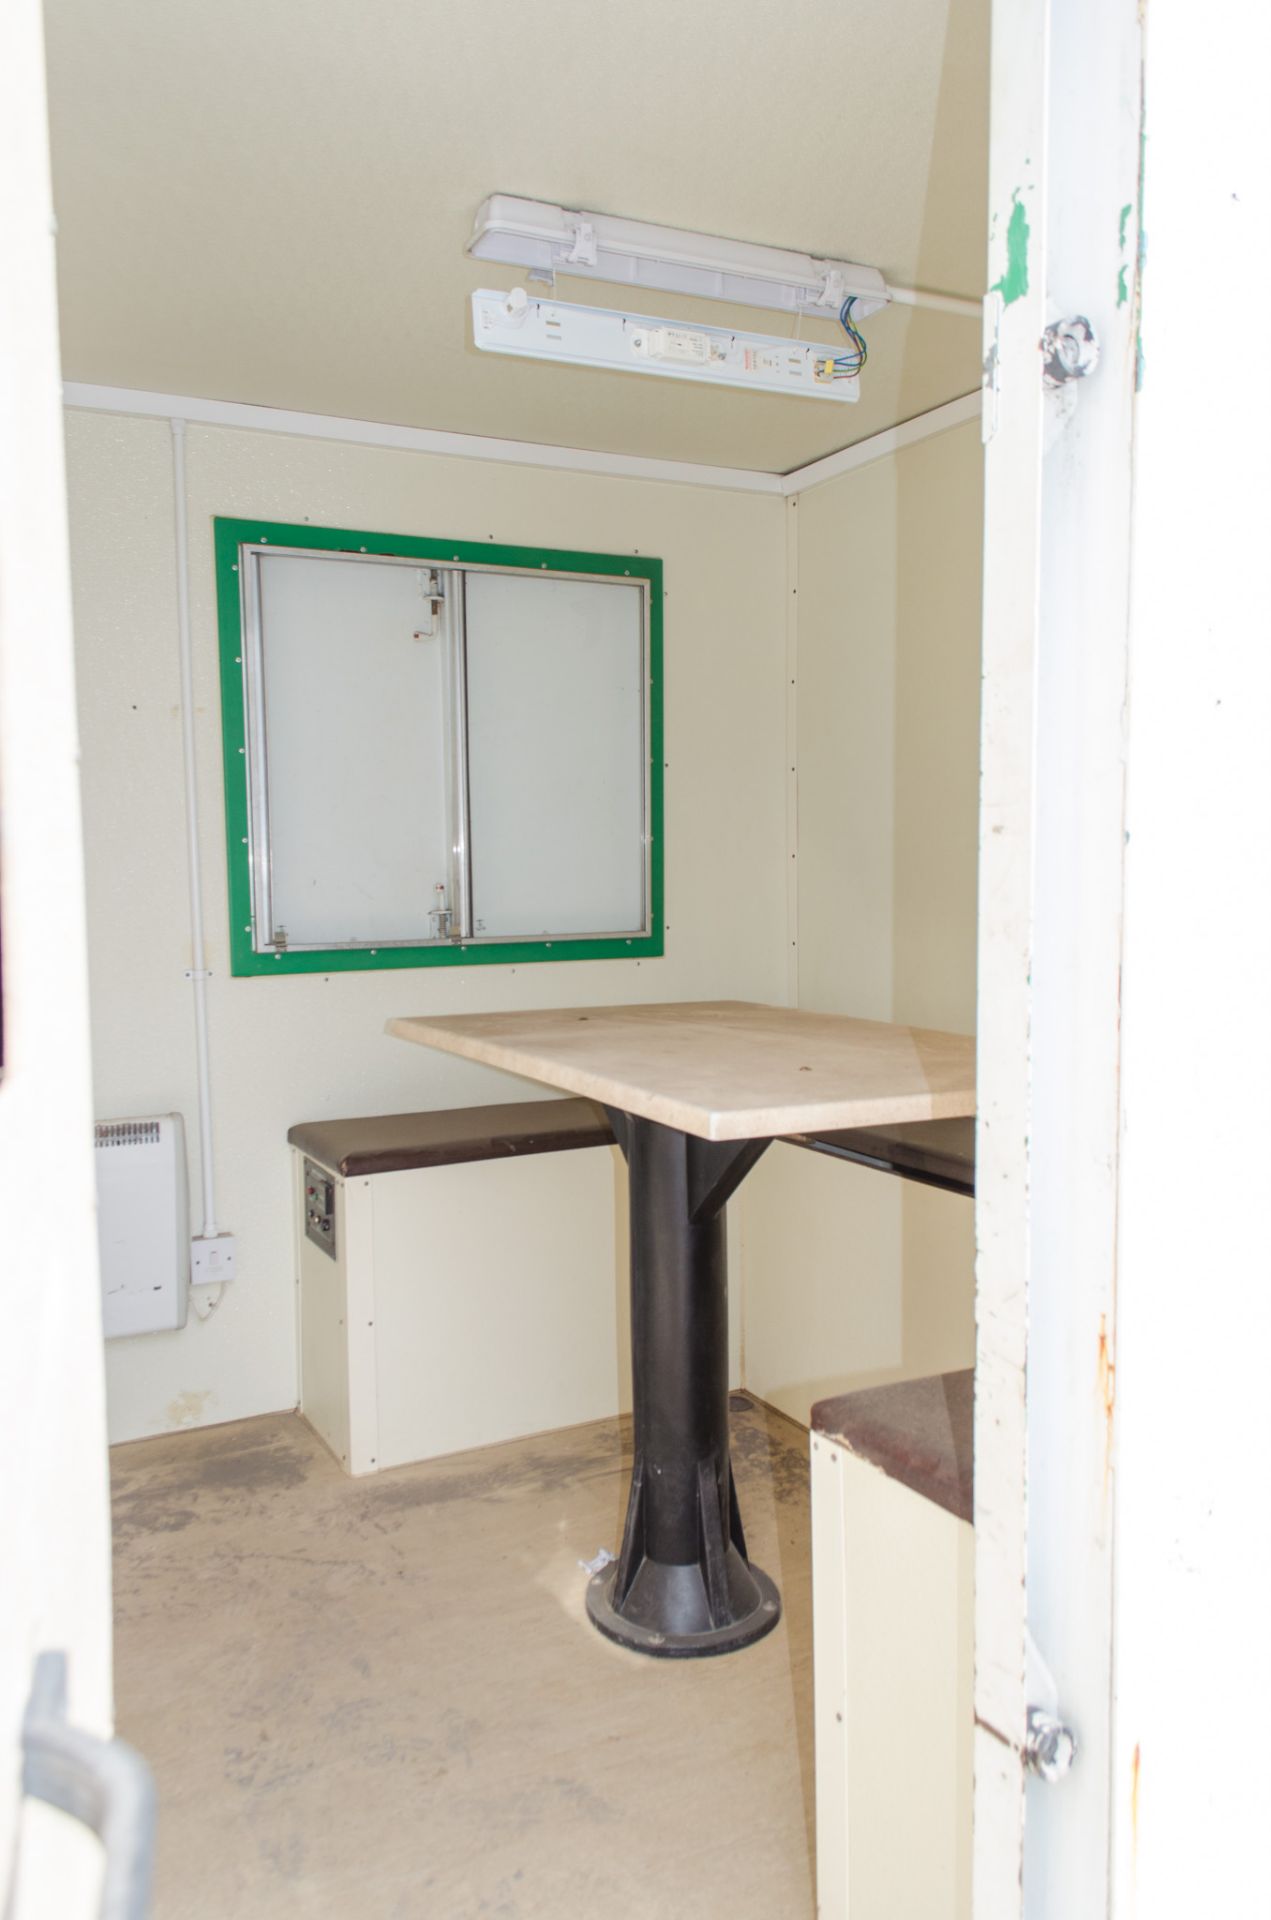 Groundhog 12 ft x 8 ft steel anti vandal mobile welfare unit Comprising of: Canteen, toilet & - Image 6 of 11